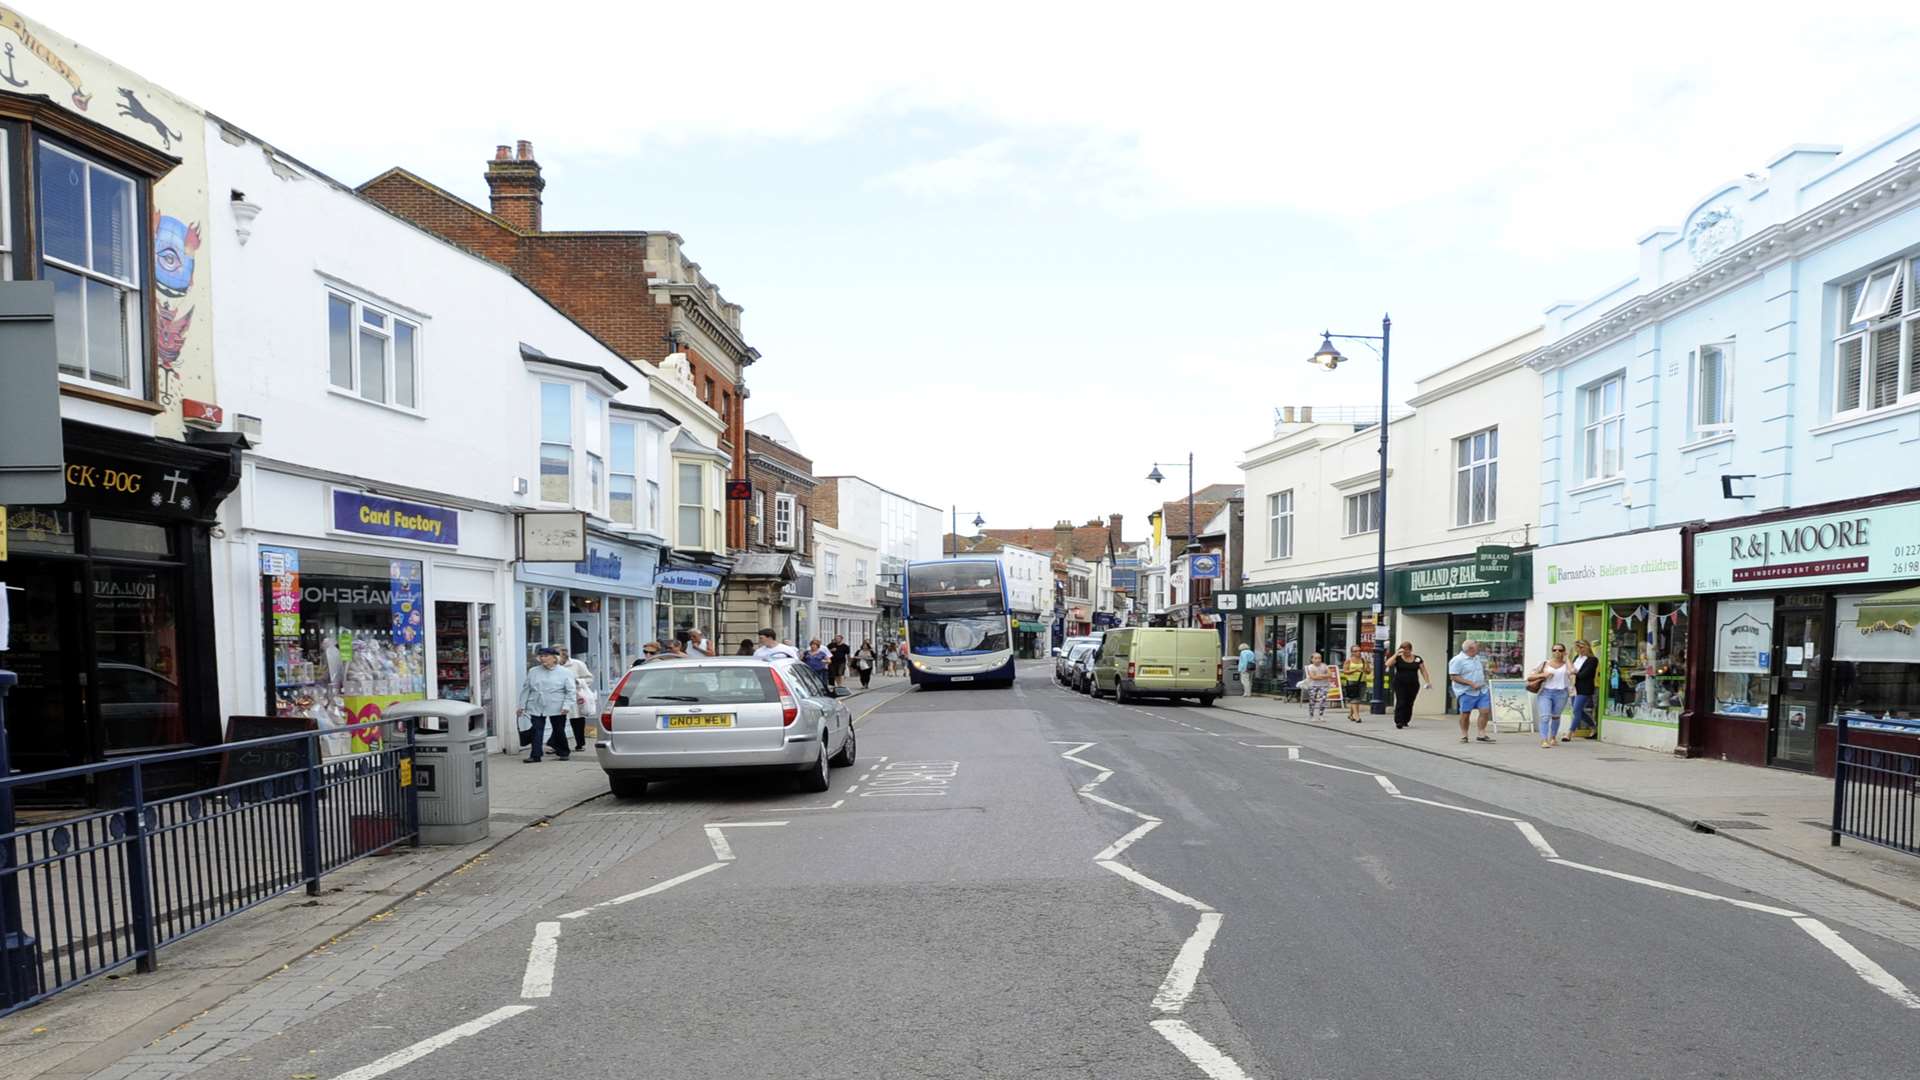 Clark almost hit a cyclist while drink-driving naked in Whitstable High Street